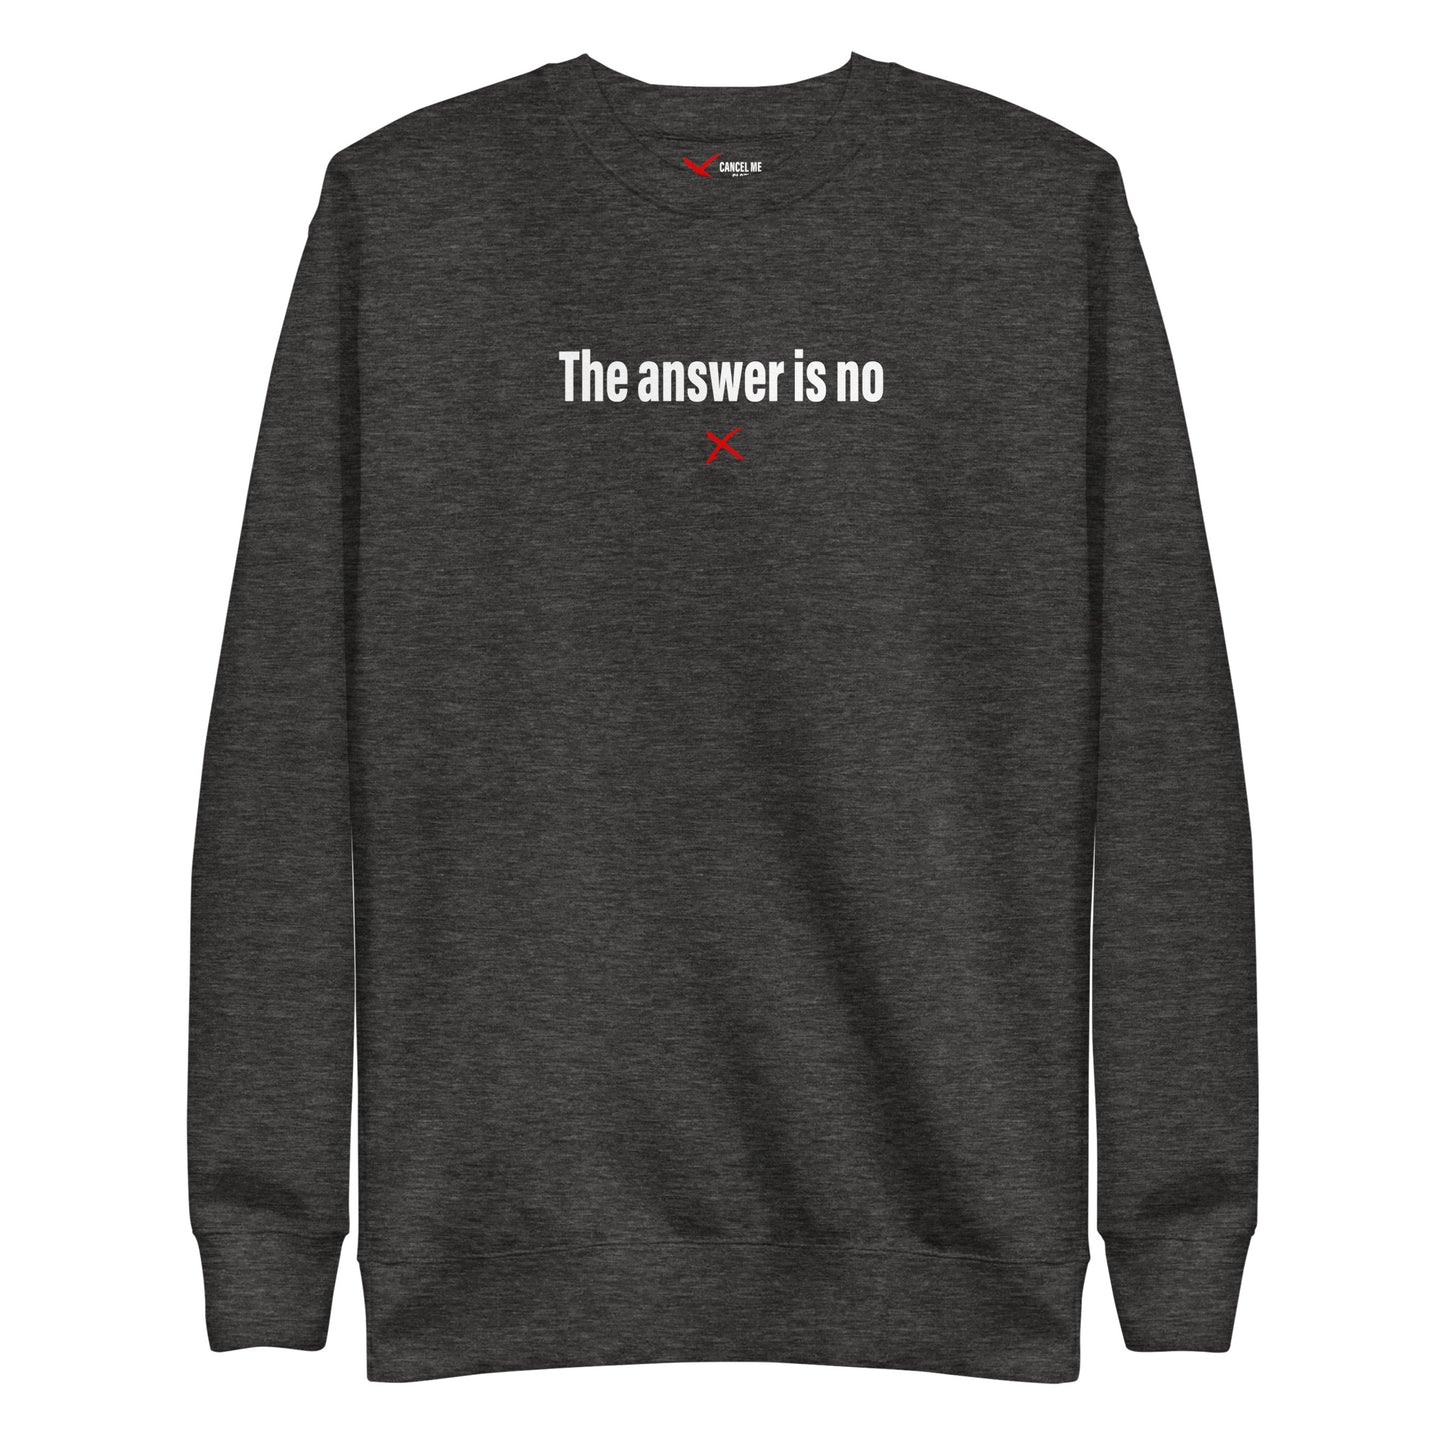 The answer is no - Sweatshirt